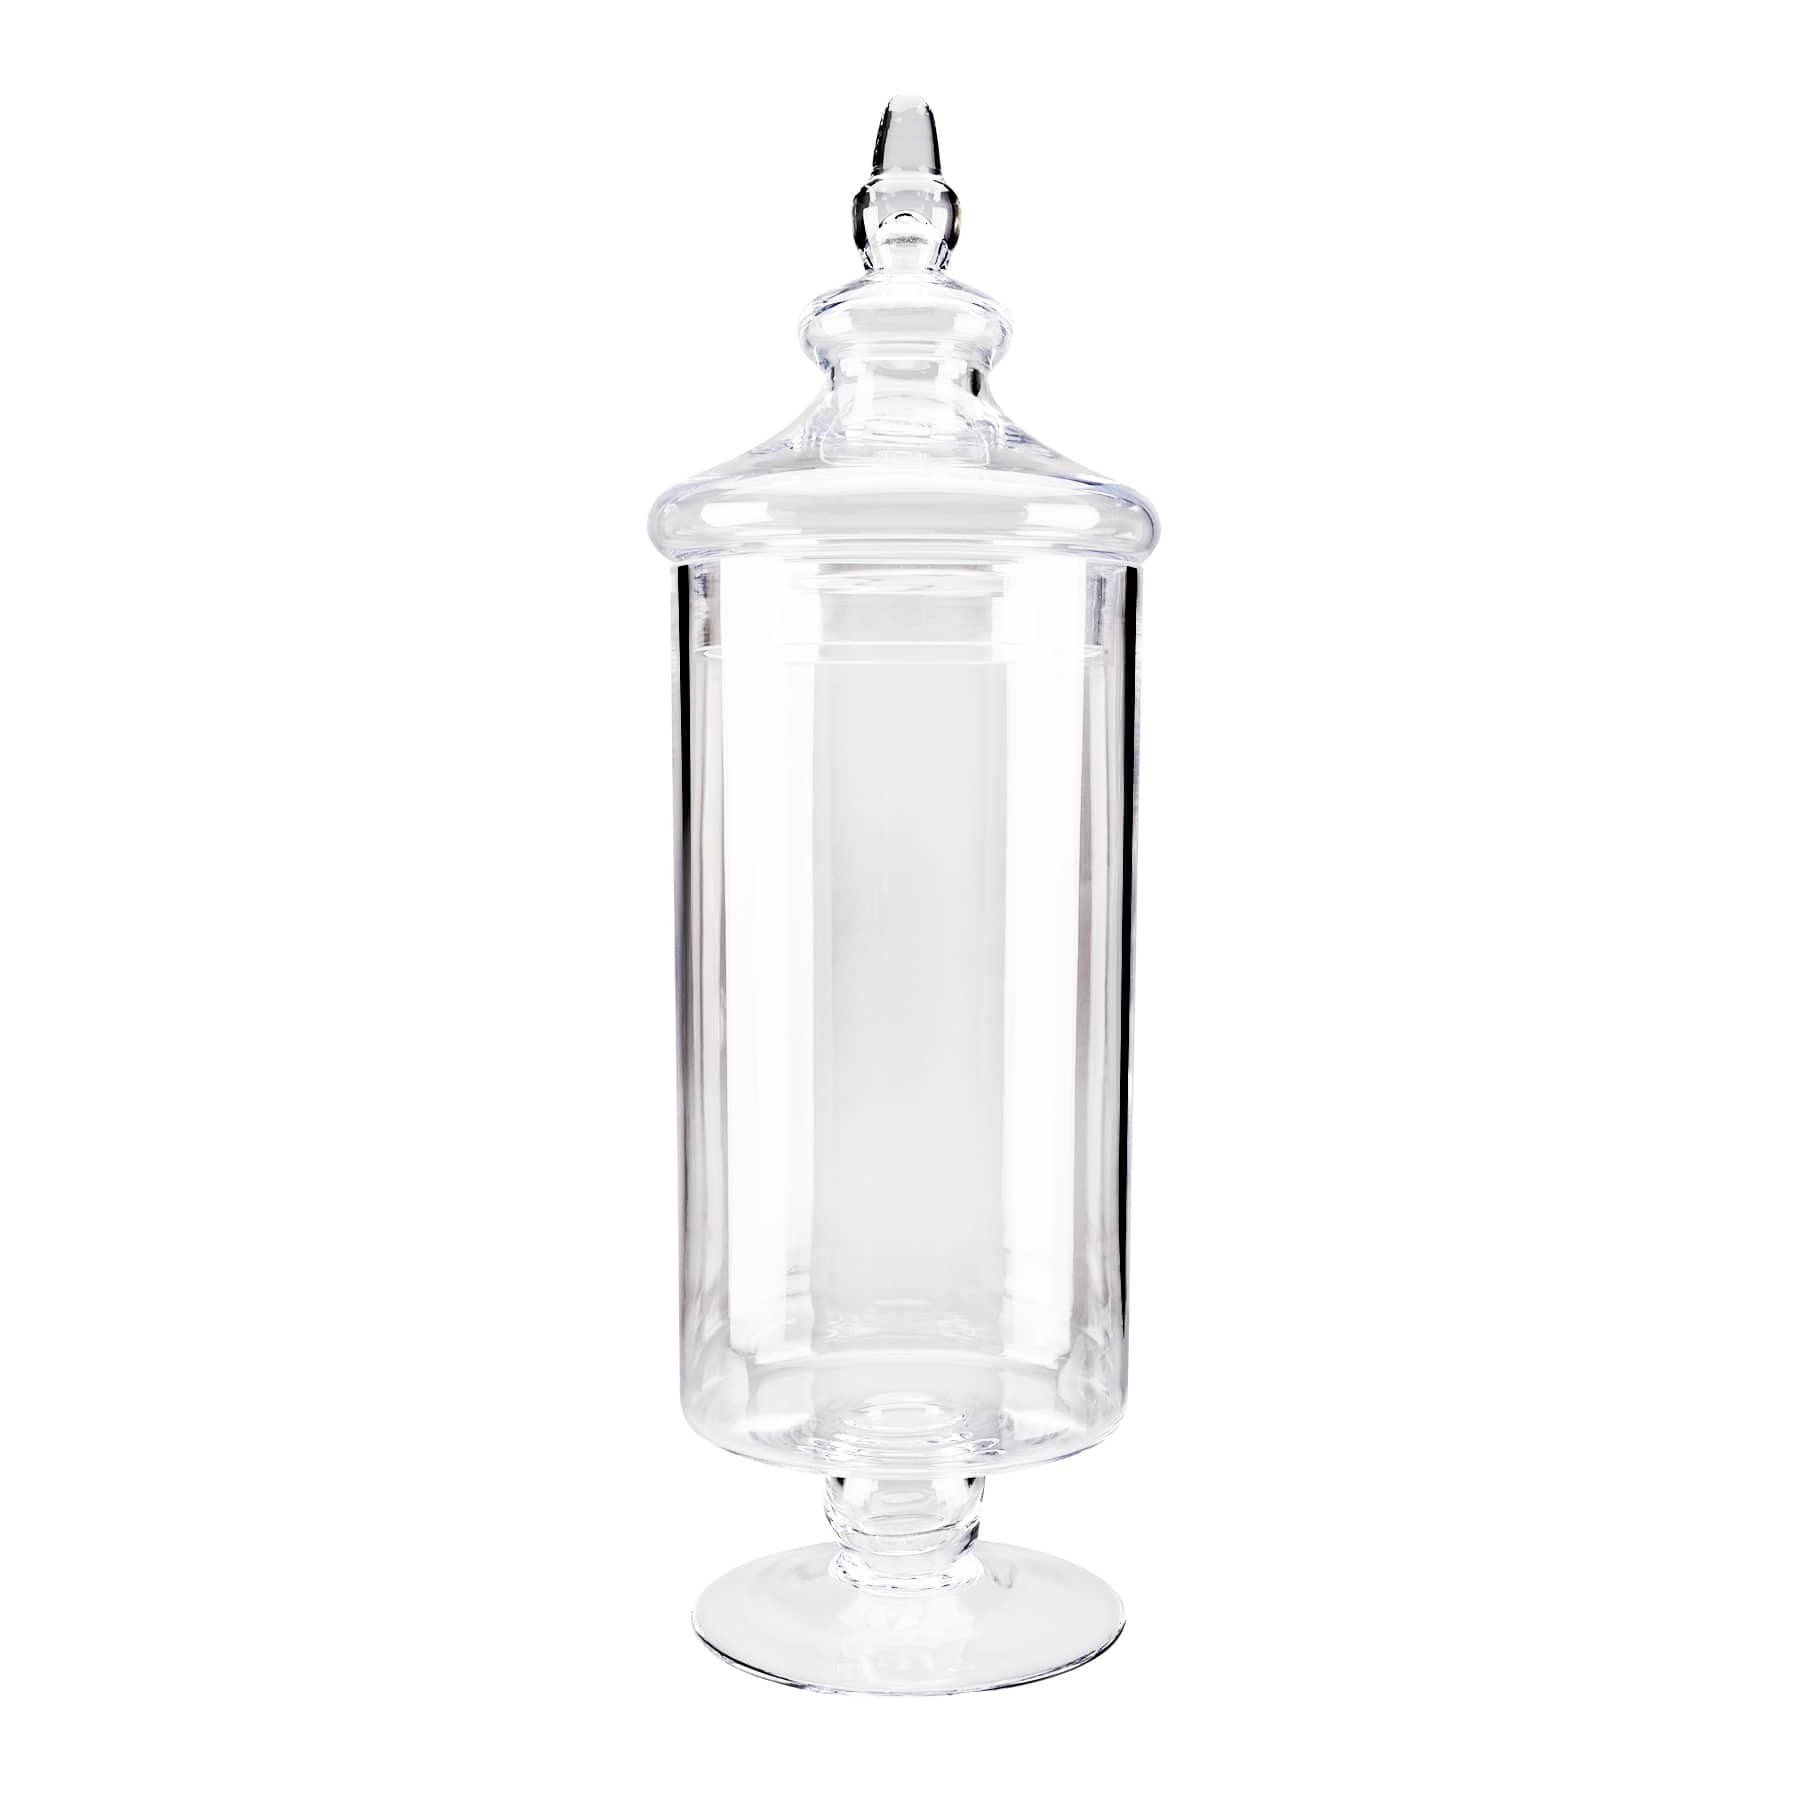 6 Pack: 17 Glass Apothecary Jar by Ashland™